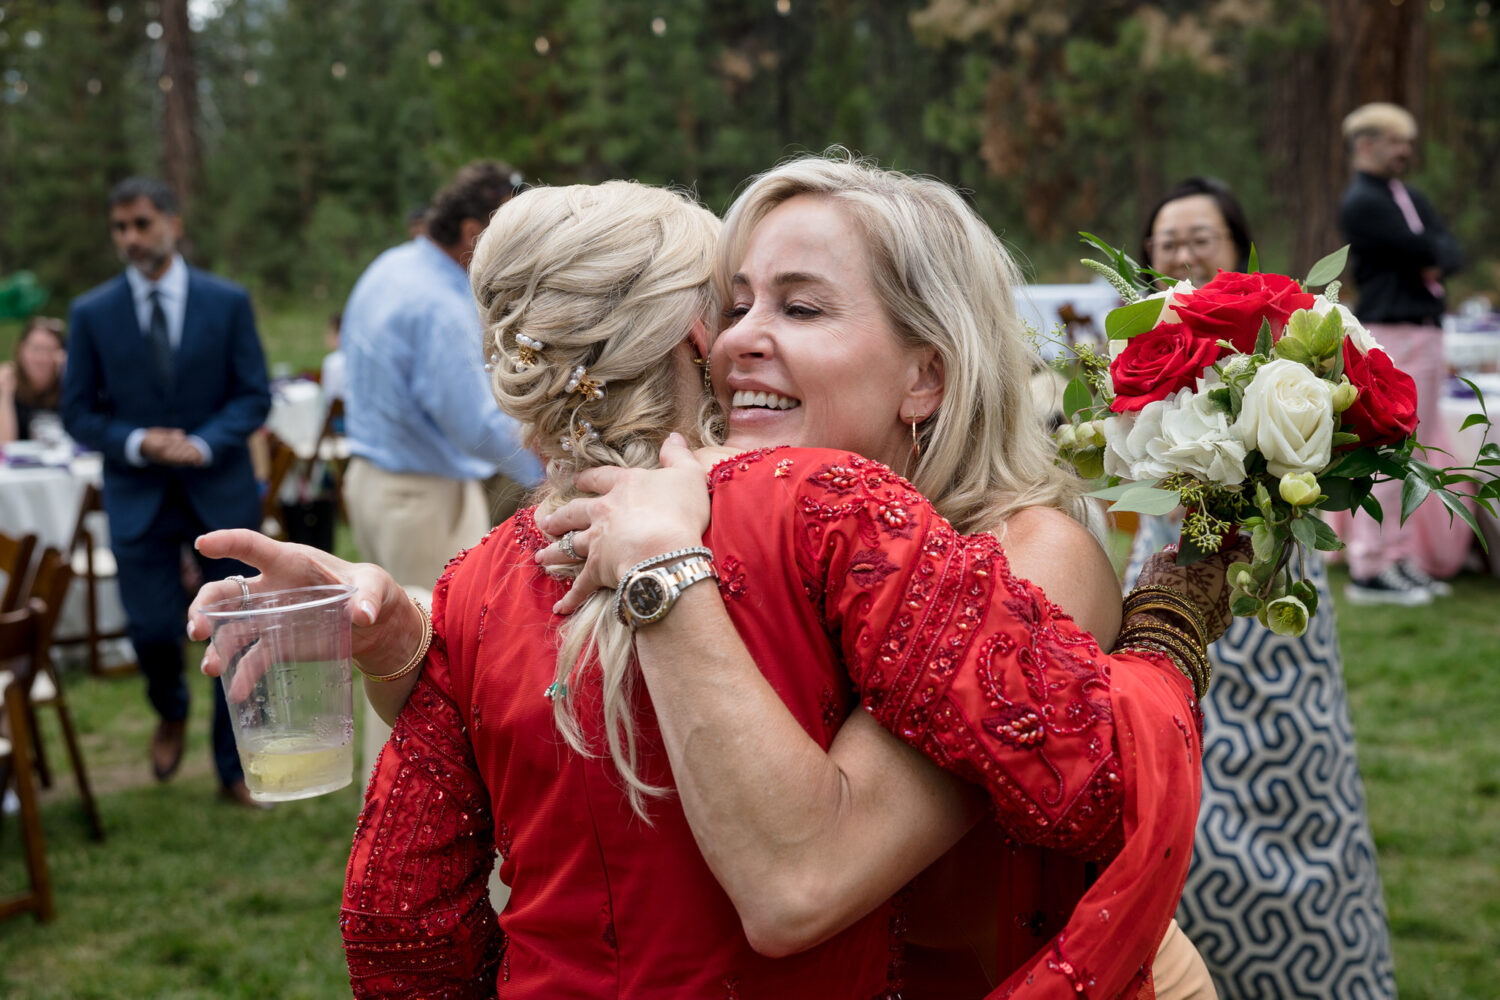 Hugs from a wedding guest at a reception on the lawn at Valhalla Tahoe.